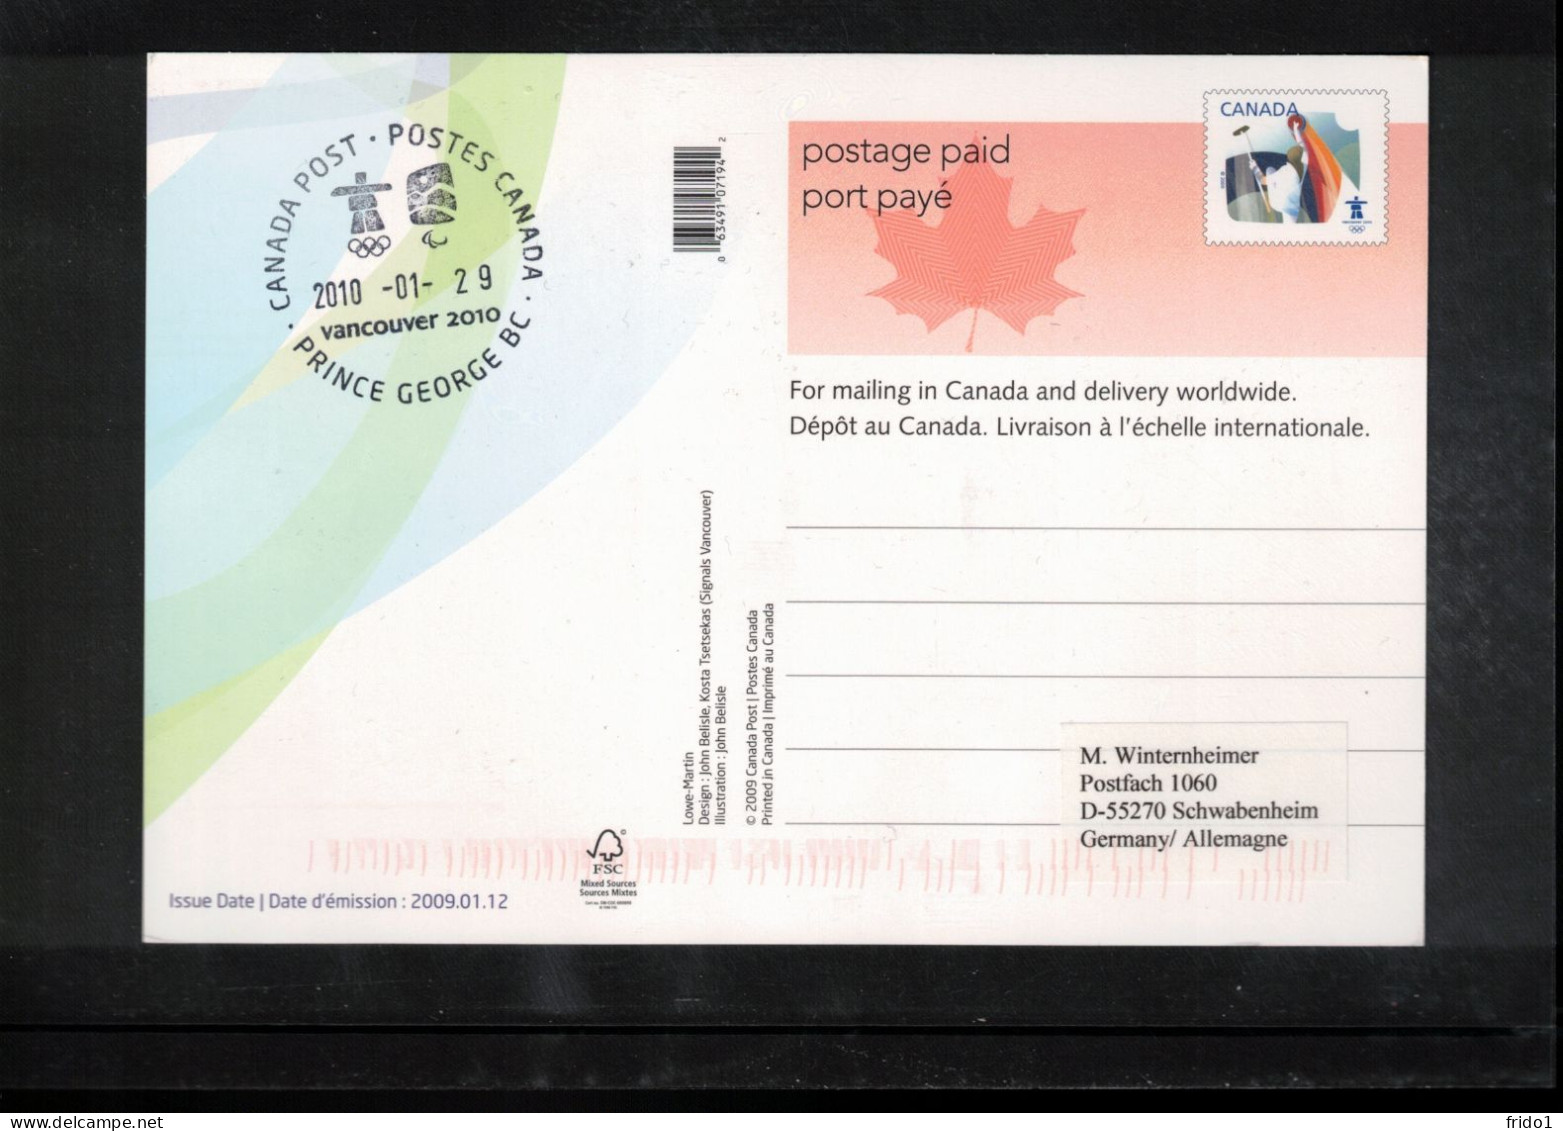 Canada 2010 Olympic Games Vancouver - PRINCE GEORGE BC Postmark Interesting Postcard - Winter 2010: Vancouver